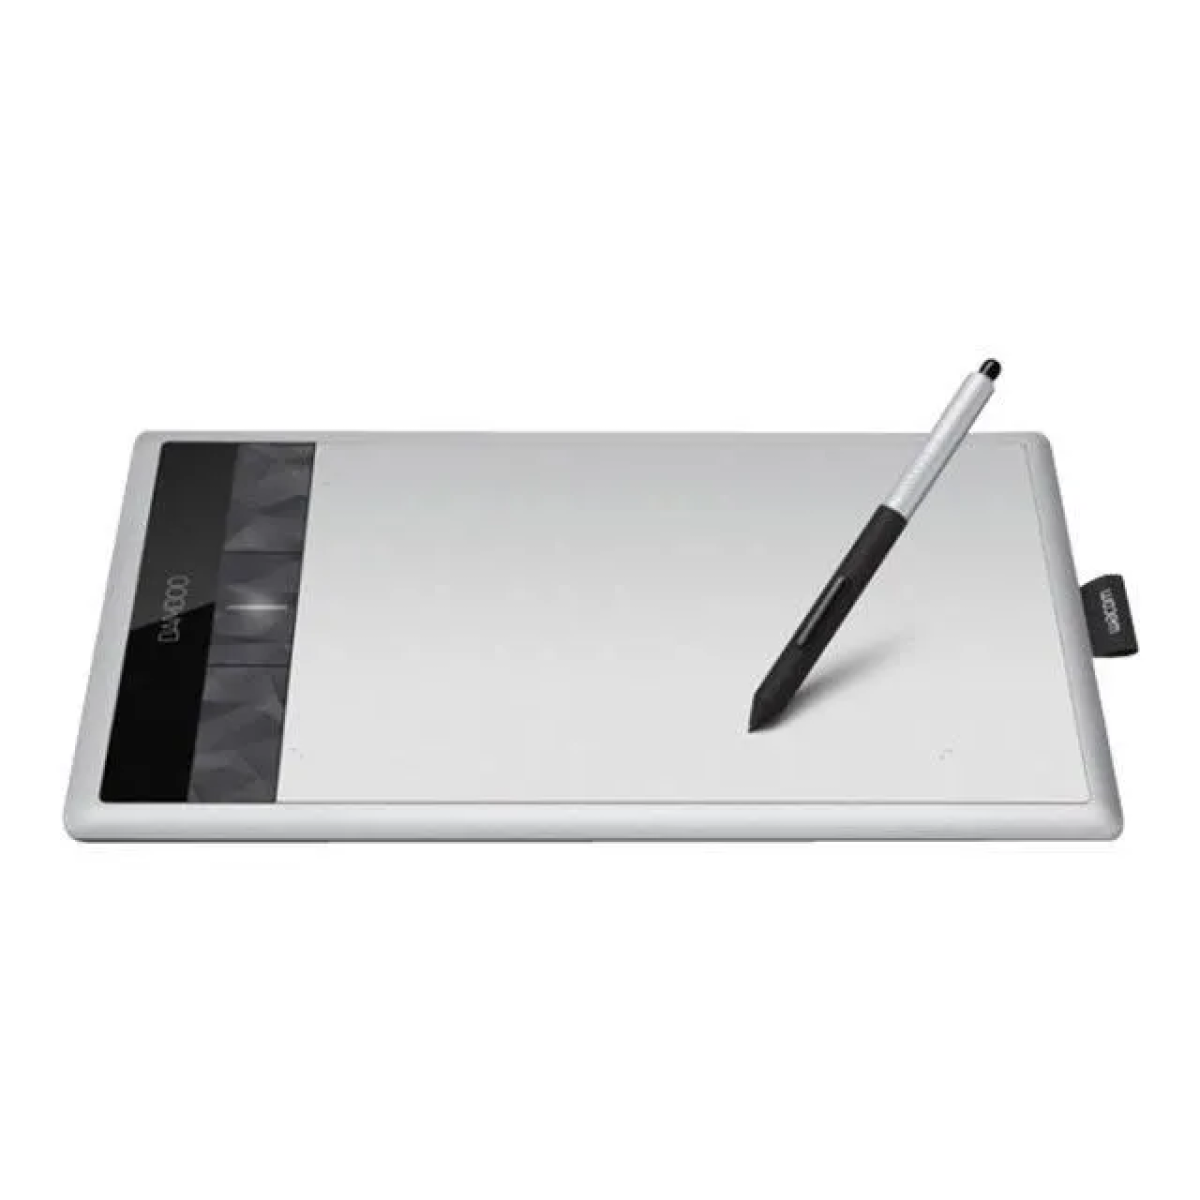 Wacom Bamboo CTH-670 Tablette graphique Gris